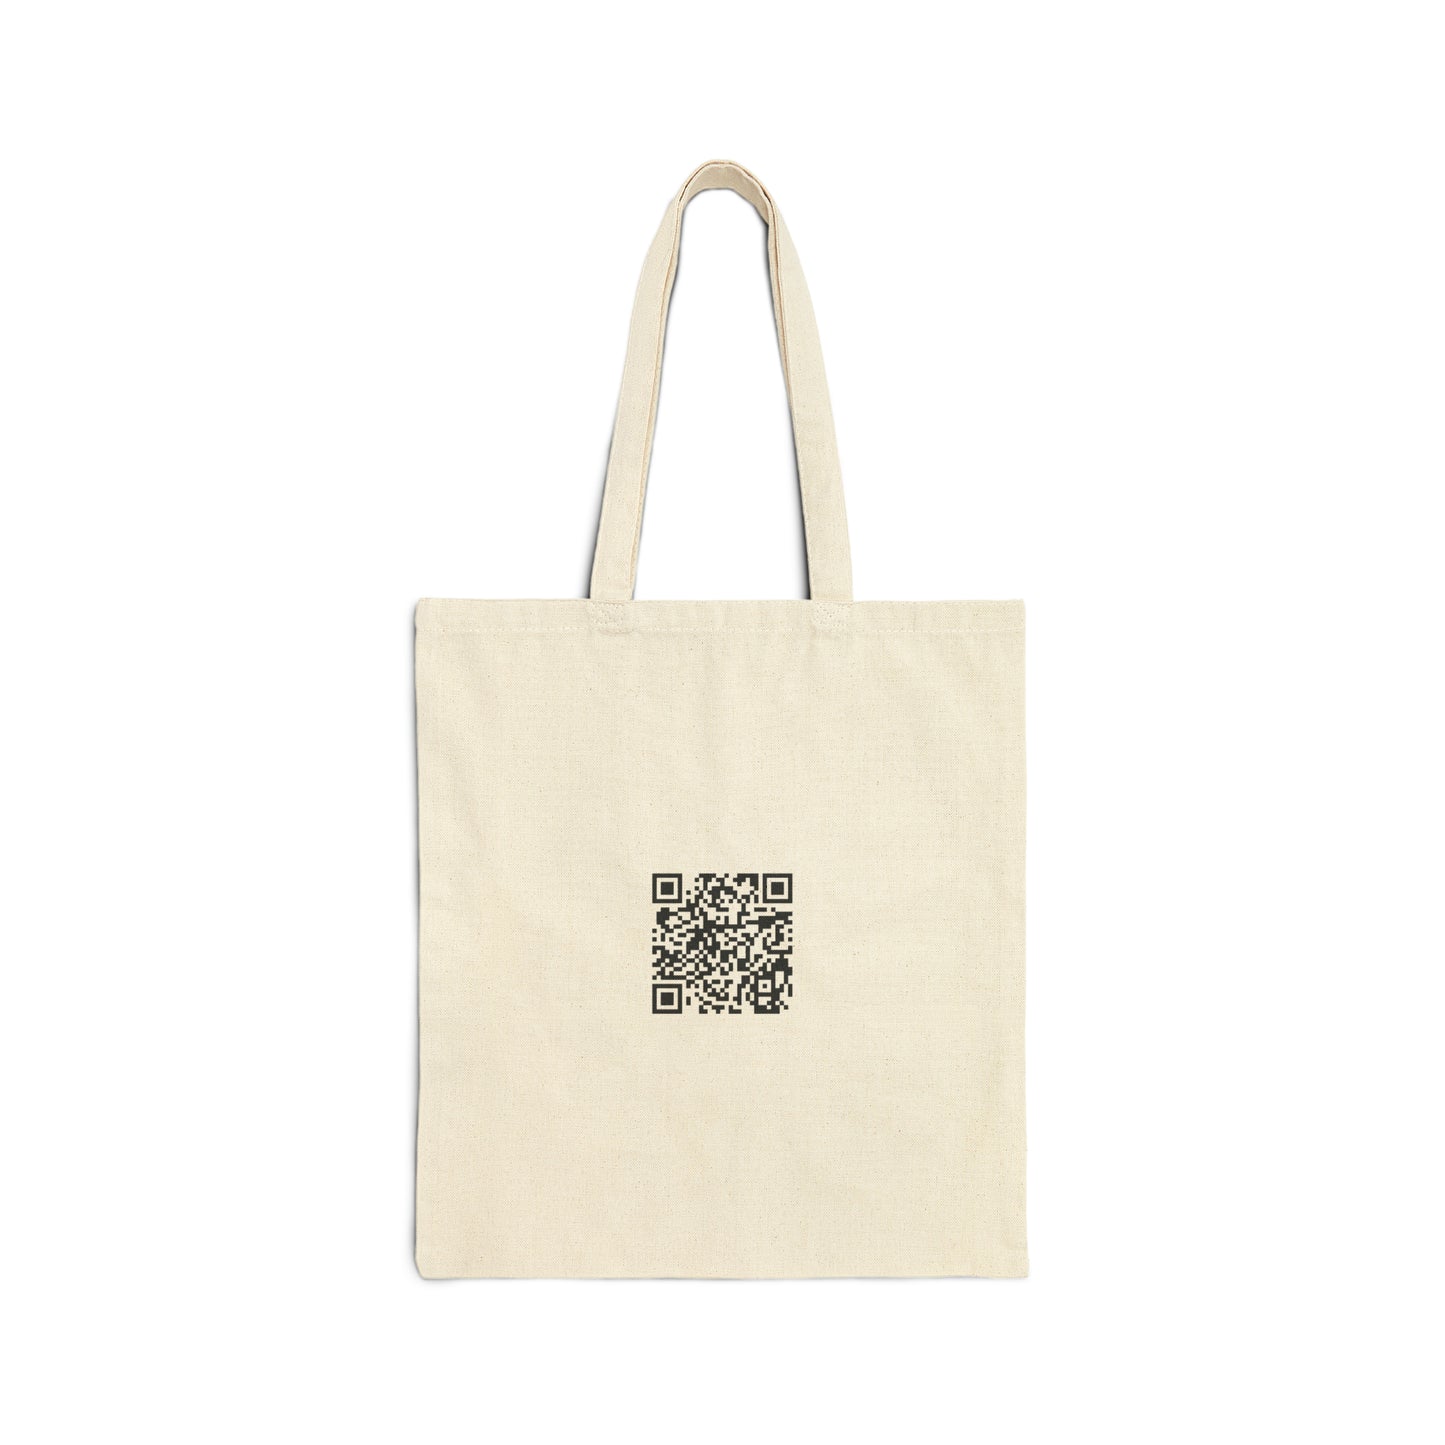 The Paletti Notebook - Cotton Canvas Tote Bag